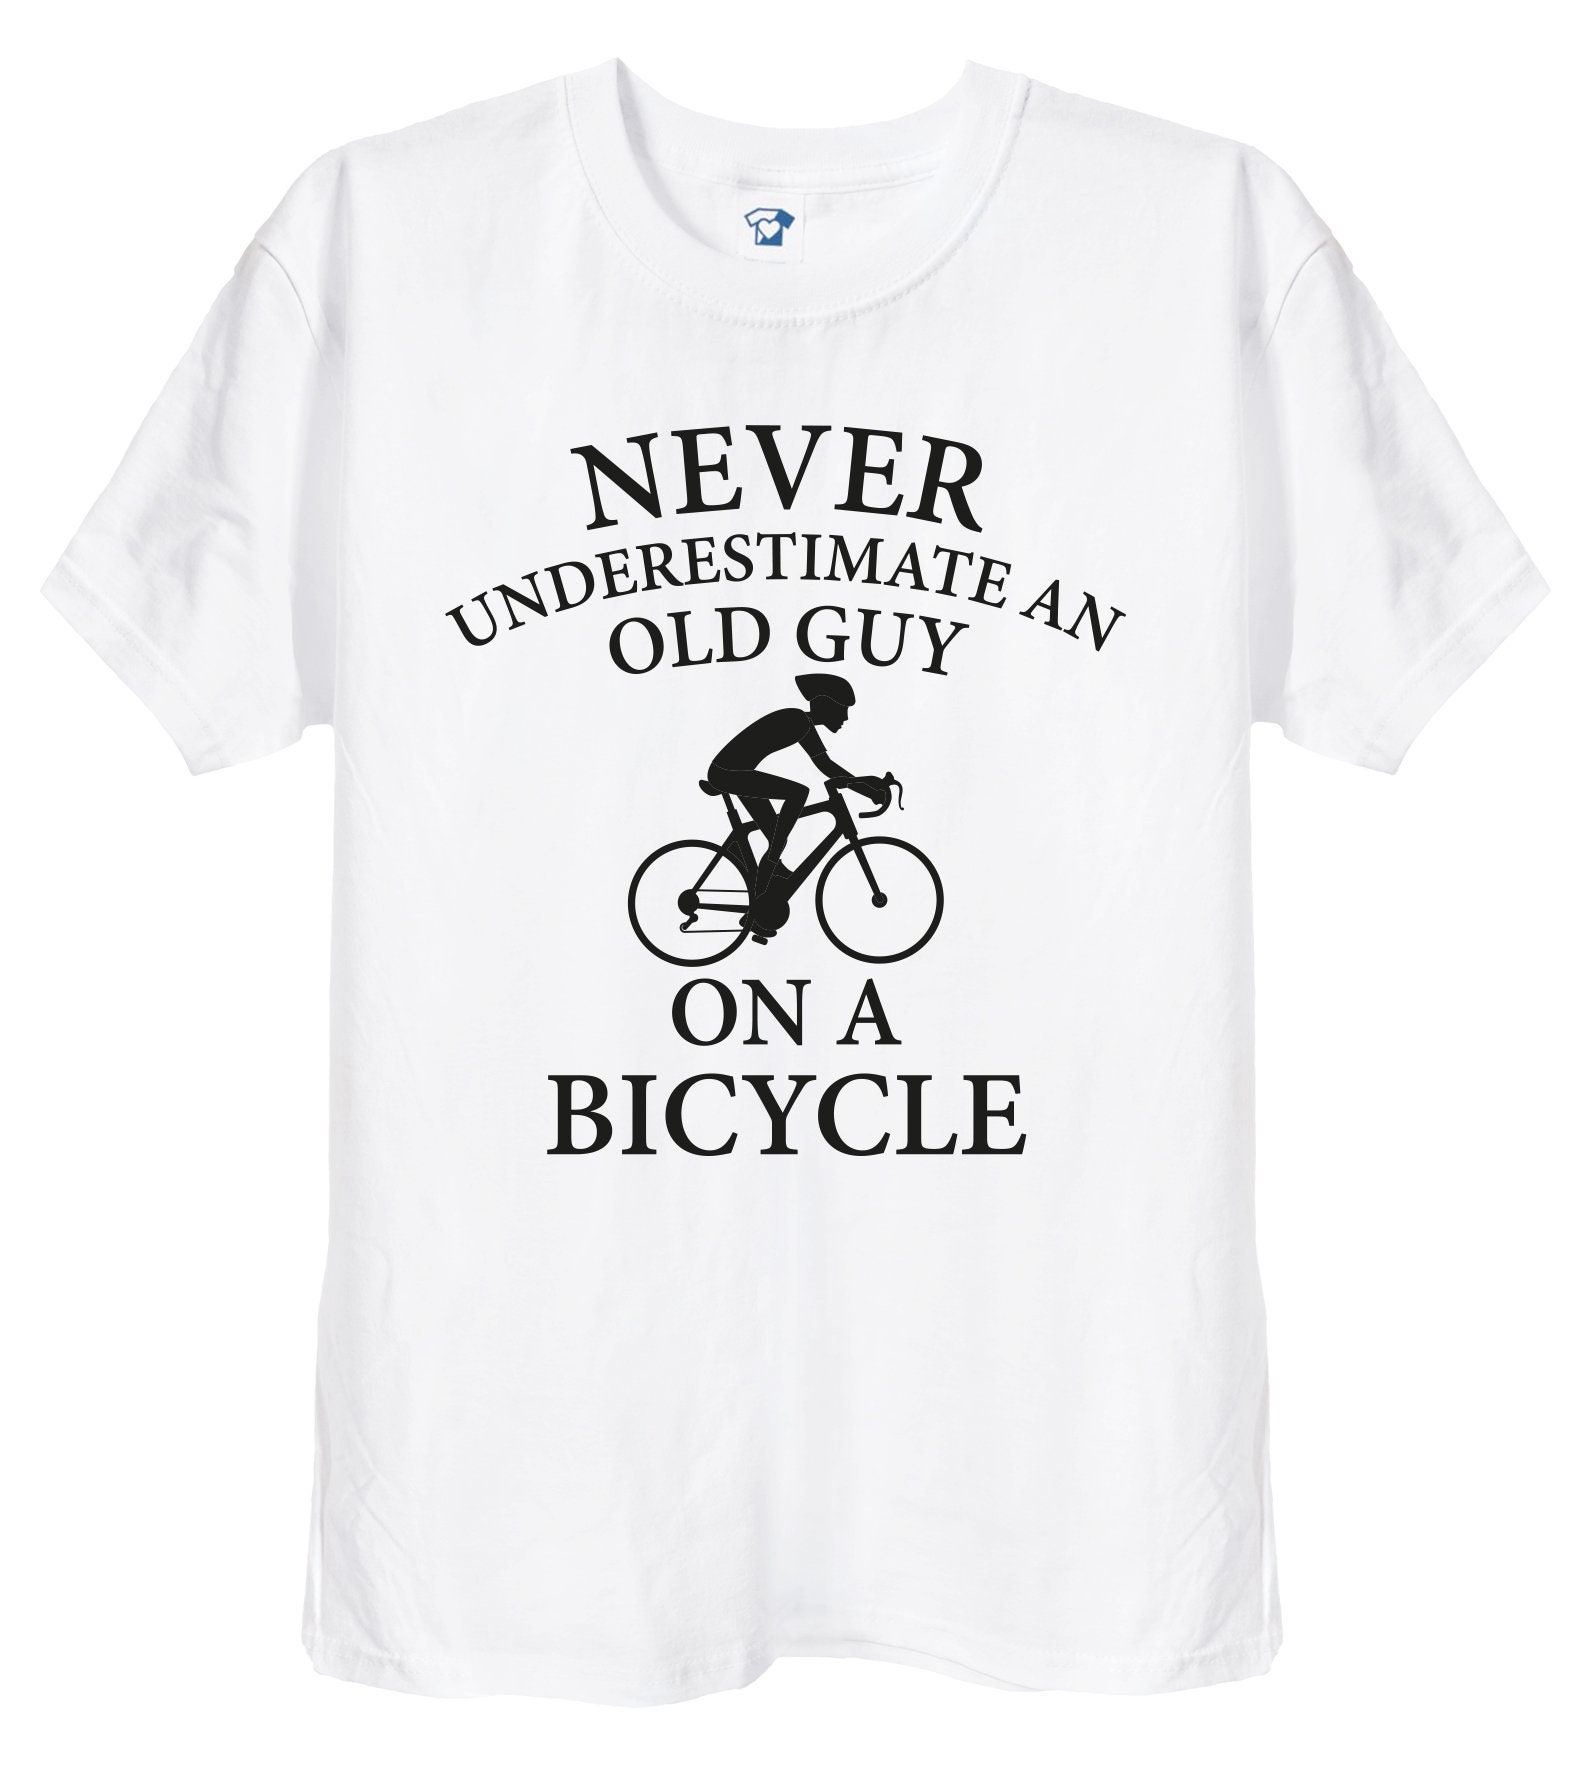 Details about   Never Underestimate Old Man Motorcycle T Shirt Funny Gift Dad Bike Biker Tee A75 